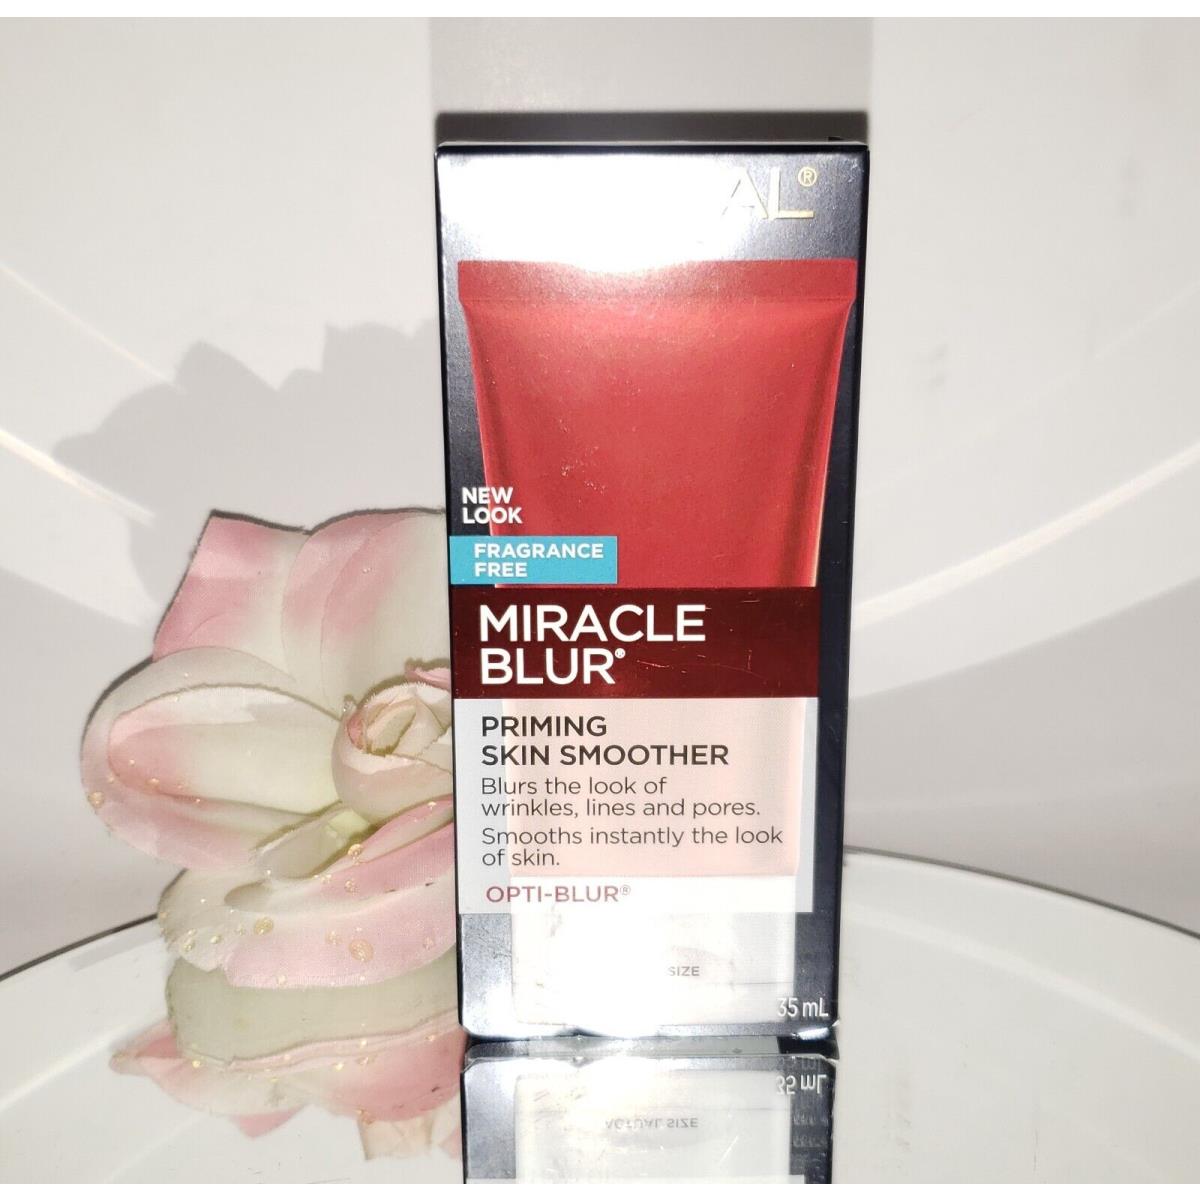 Loreal Miracle Blur Priming Instant Skin Smoother Fragrance Free Primer 1.18oz